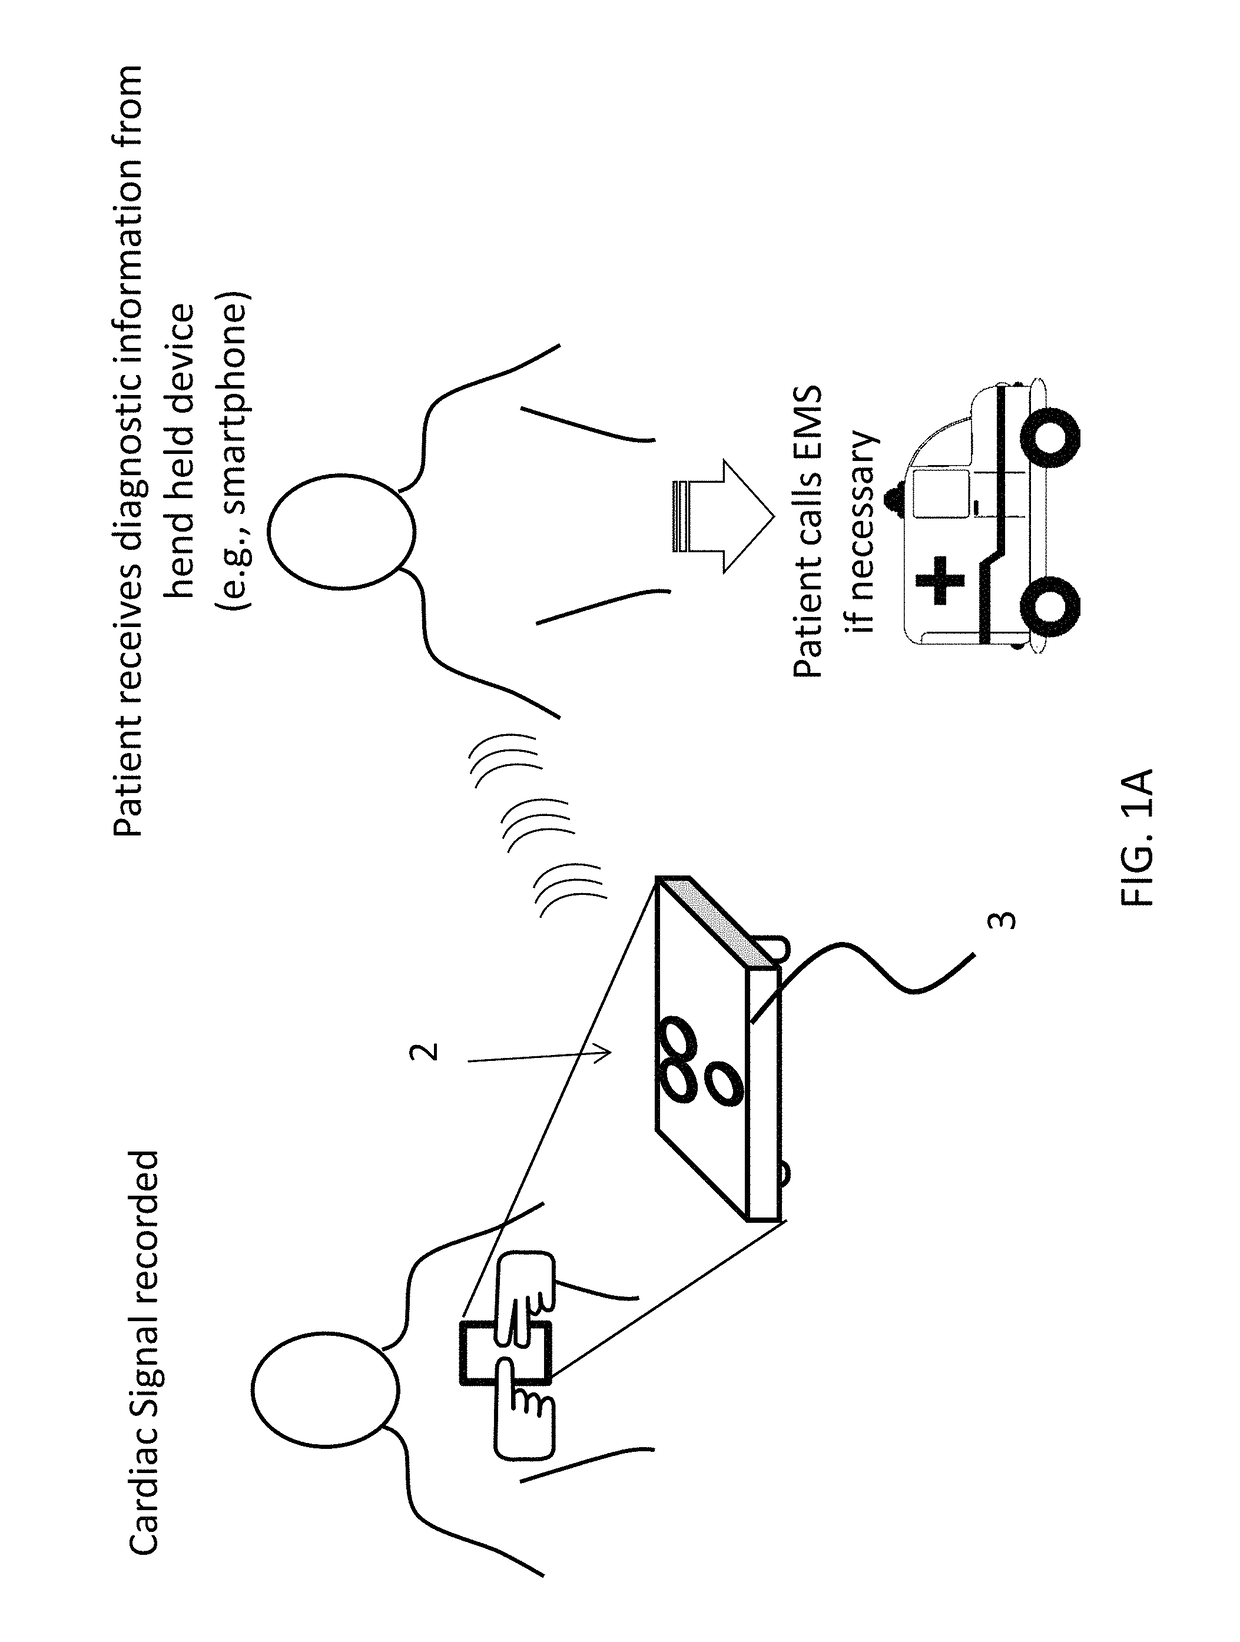 Mobile three-lead cardiac monitoring device and method for automated diagnostics